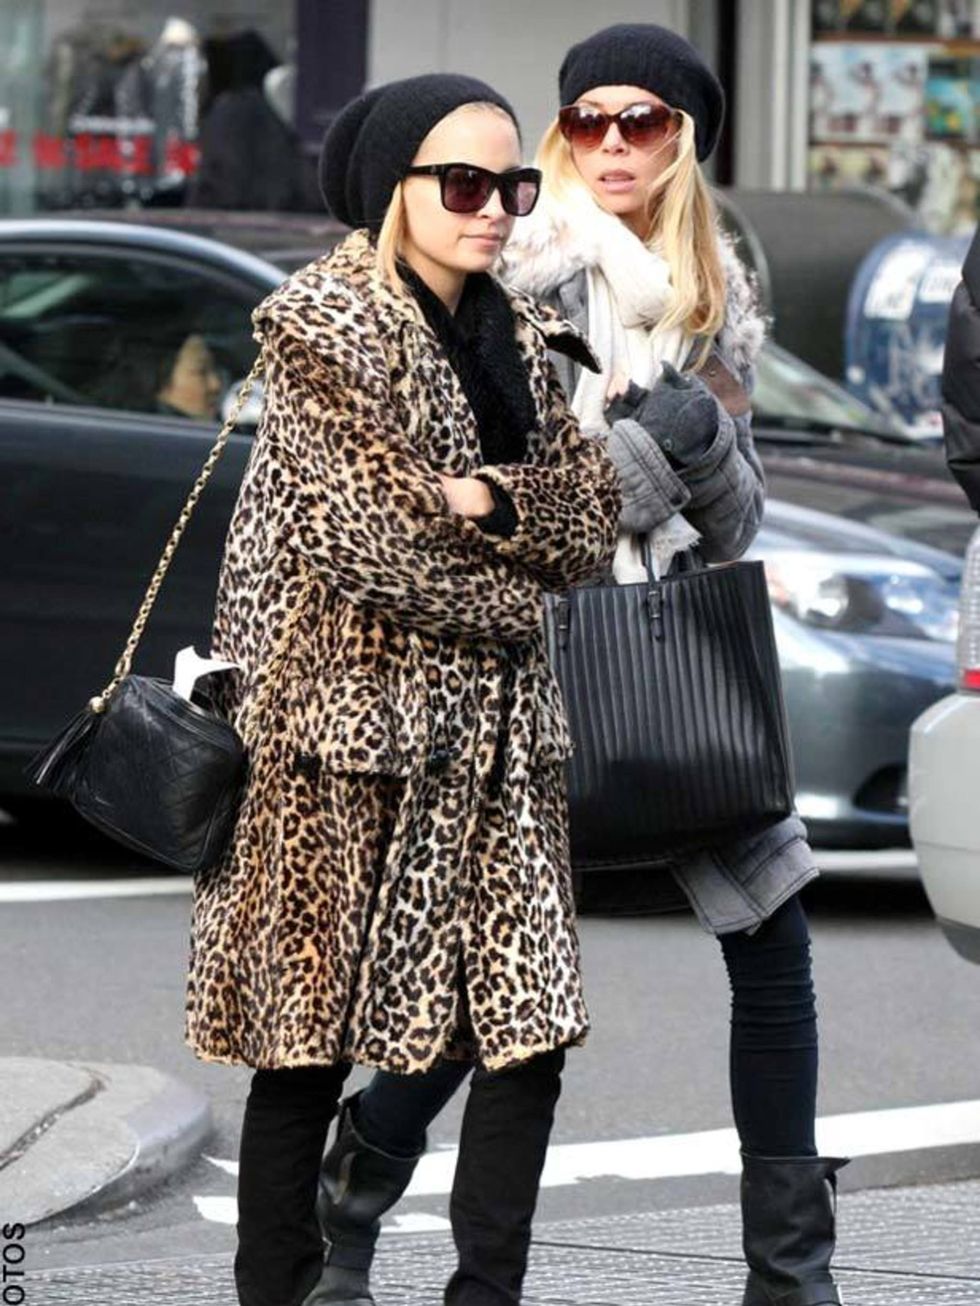 <p><a href="http://www.elleuk.com/starstyle/style-files/%28section%29/nicole-richie/%28offset%29/0/%28img%29/542508">Nicole Richie</a> looking chic in head-to-toe black while out shopping </p>